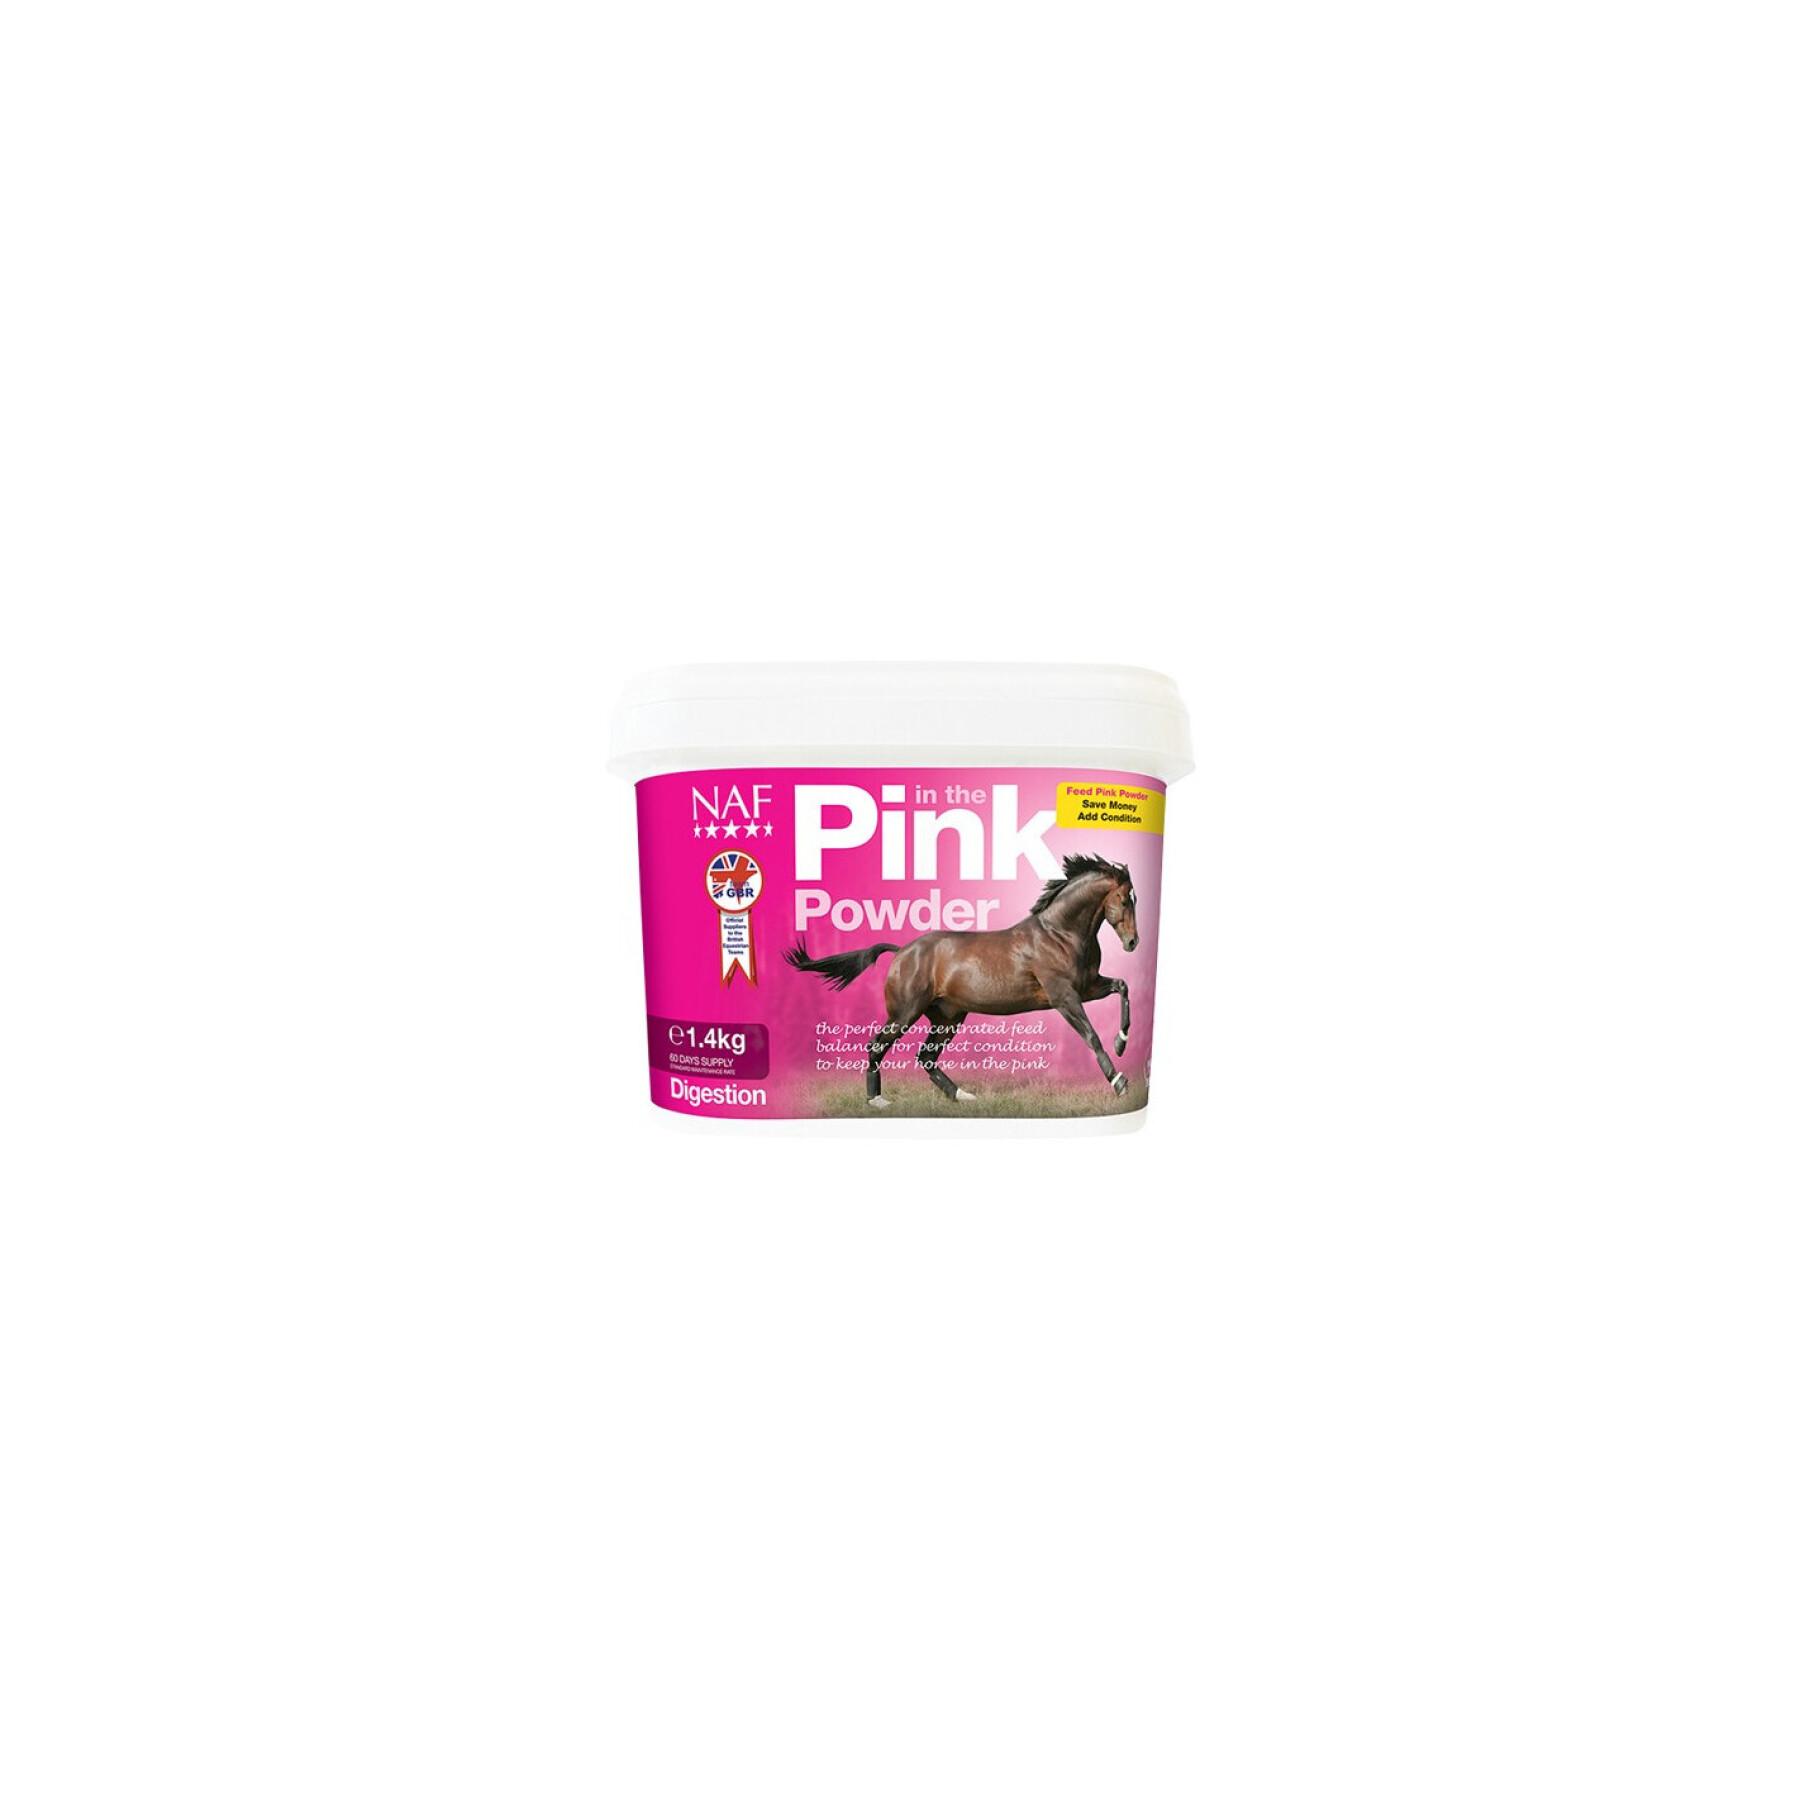 Complément alimentaire digestion pour cheval NAF In the Pink Powder